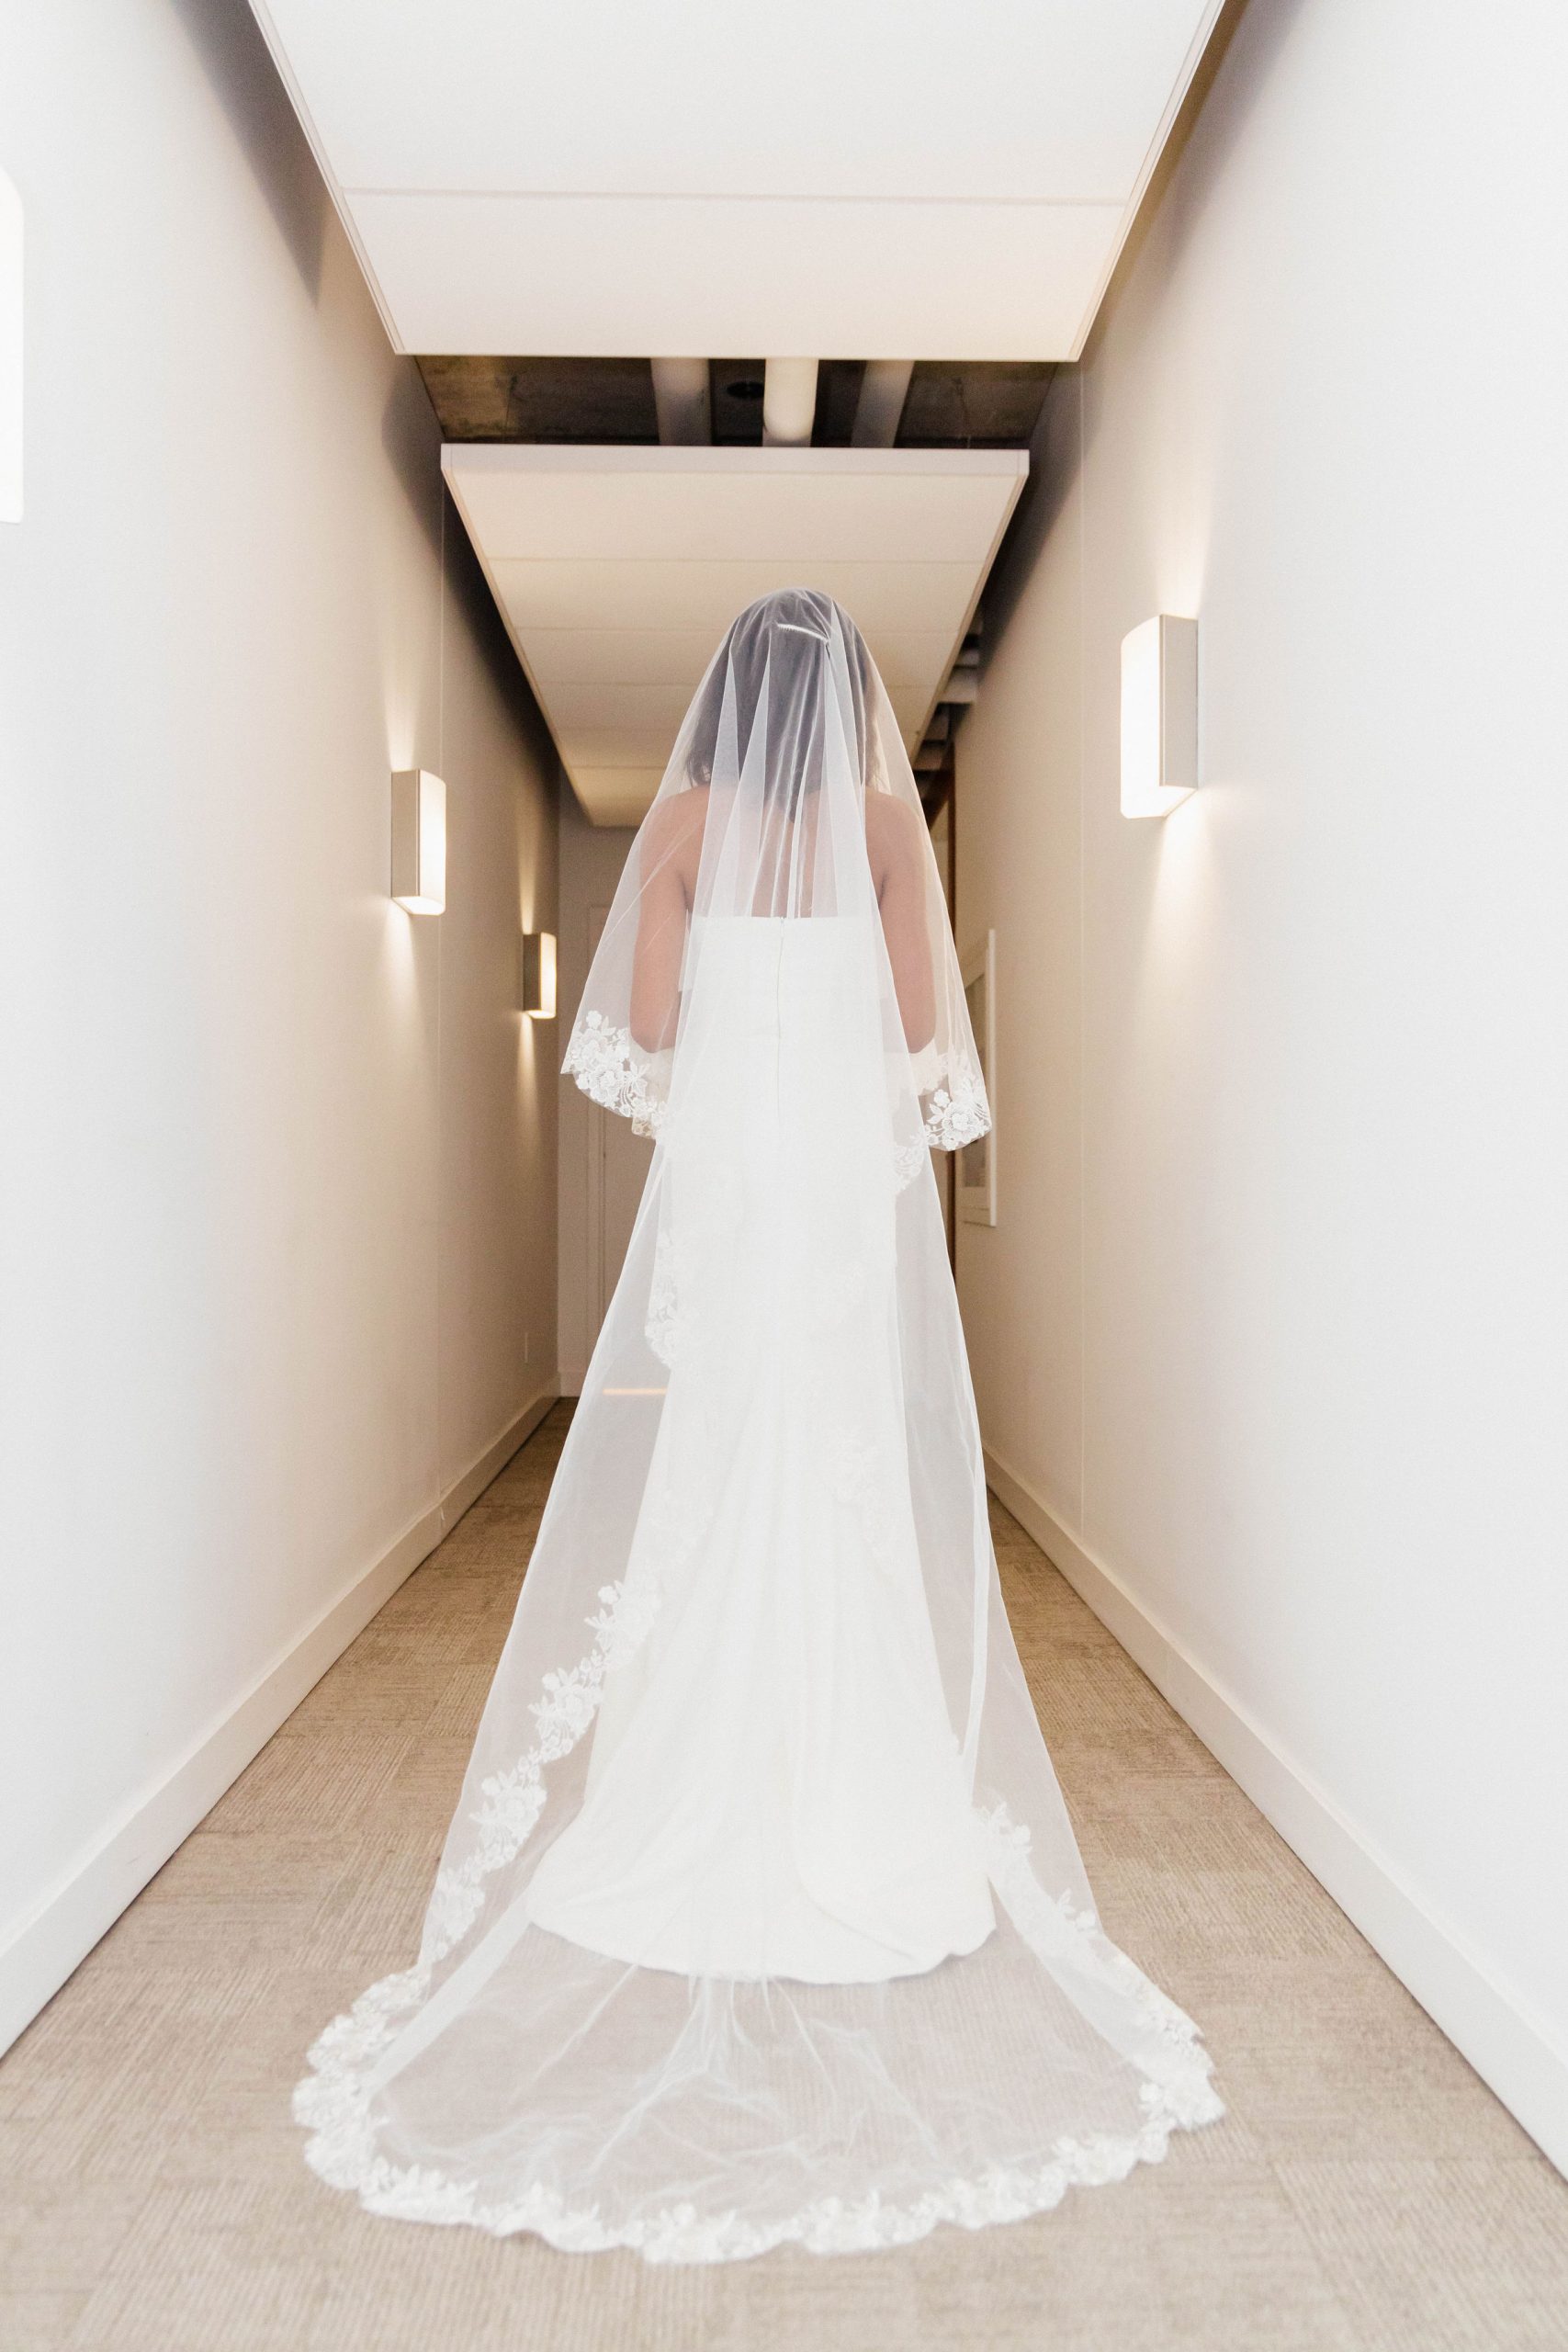 A bride in her wedding dress walking down the hall way